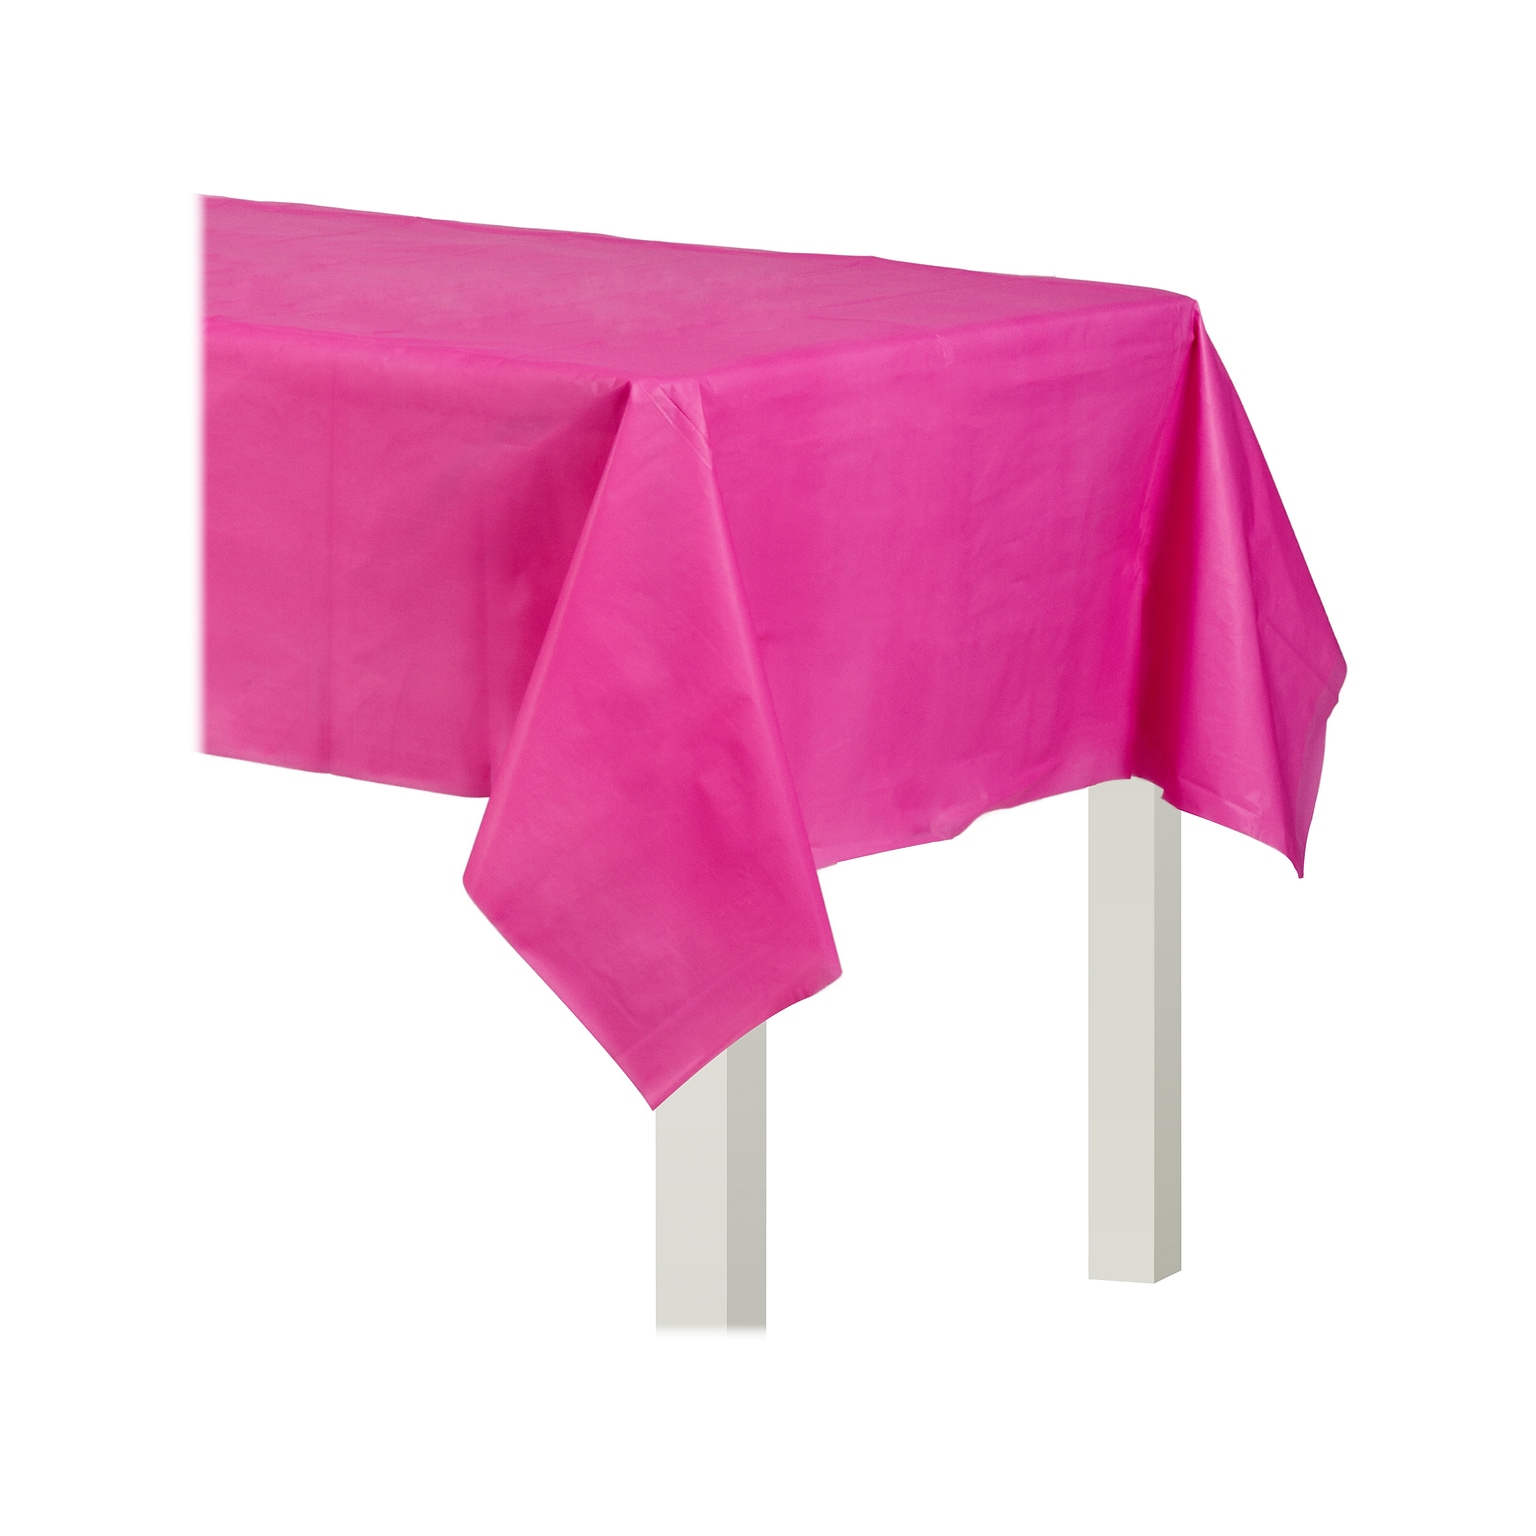 Amscan Party Table Cover, Bright Pink, 2/Pack (579592.103)